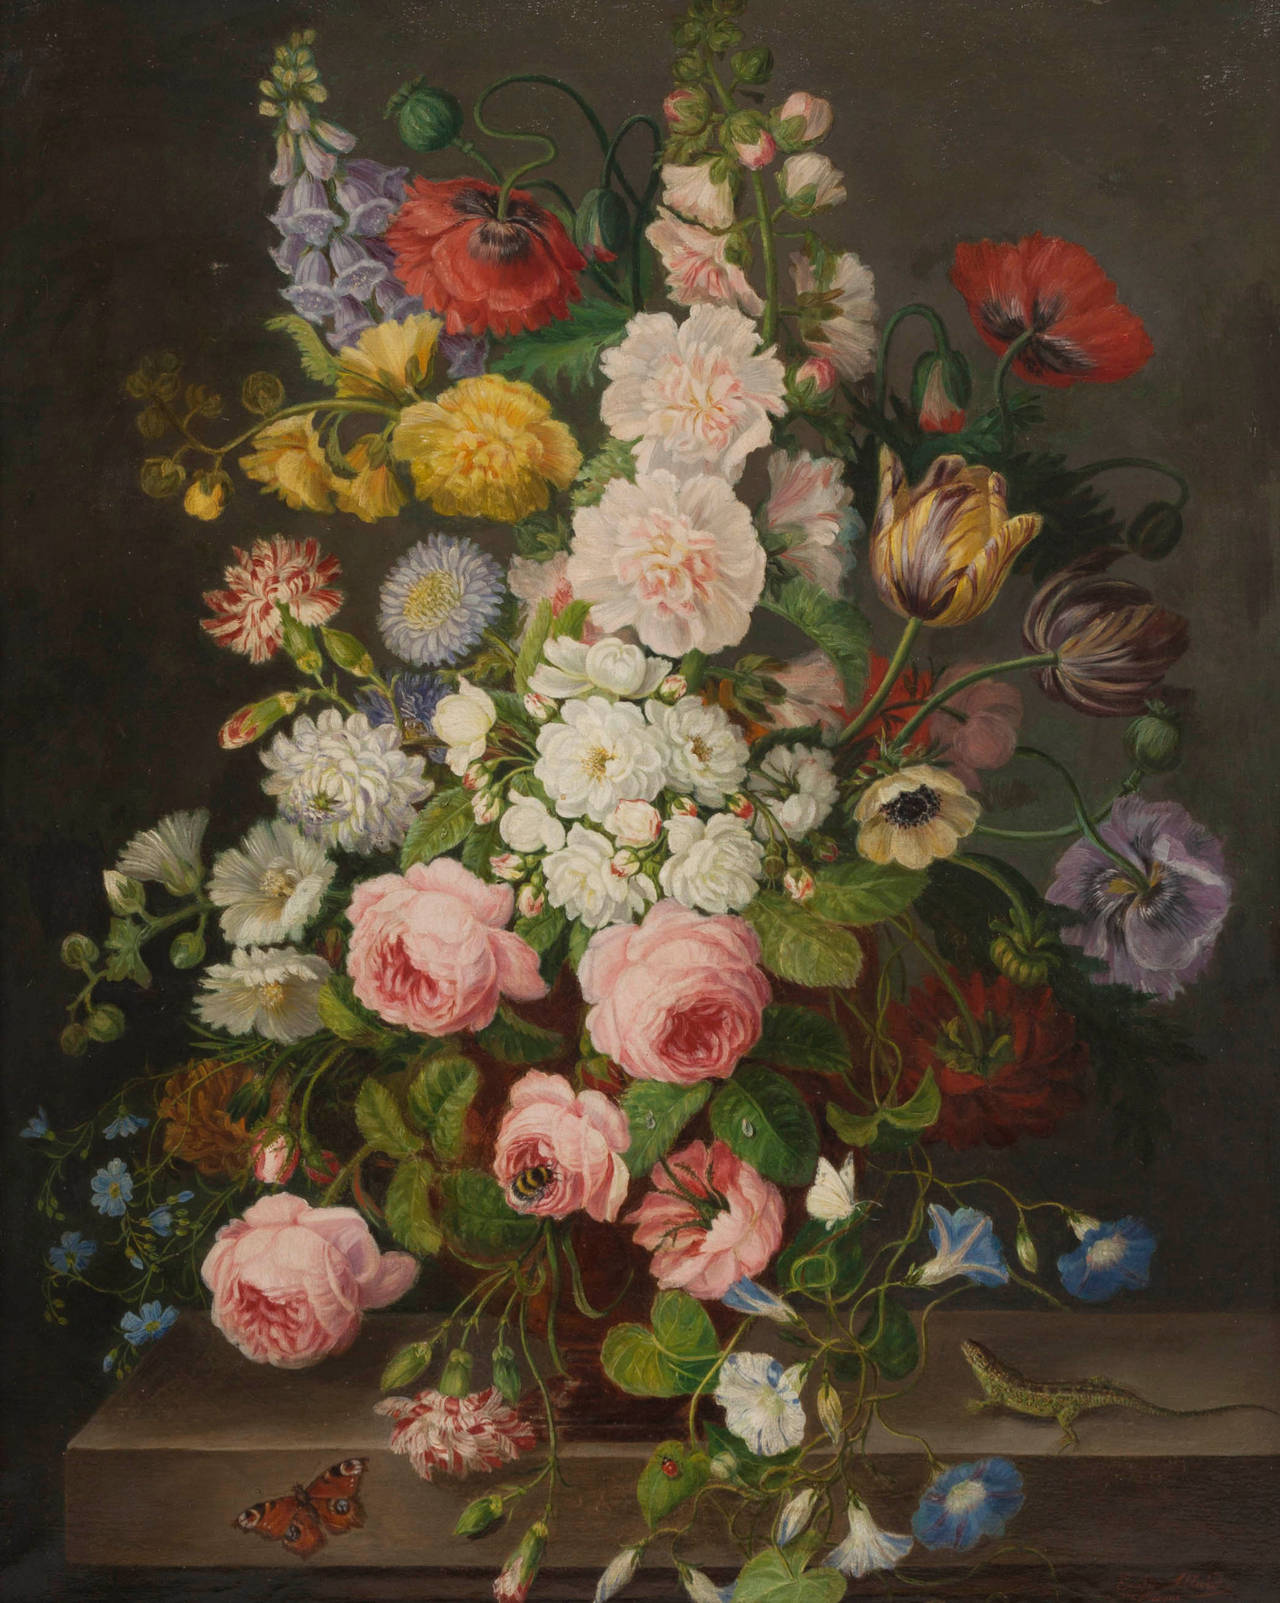 Still Life, Flowers Bouquet With Lizard and Butterfly

Oil on canvas signed on the bottom right corner Emilie Allard, born Pasquier

Dimensions : 79 x 63 cm

Emilie Allard lived in Paris and was active during the second half of the 19th